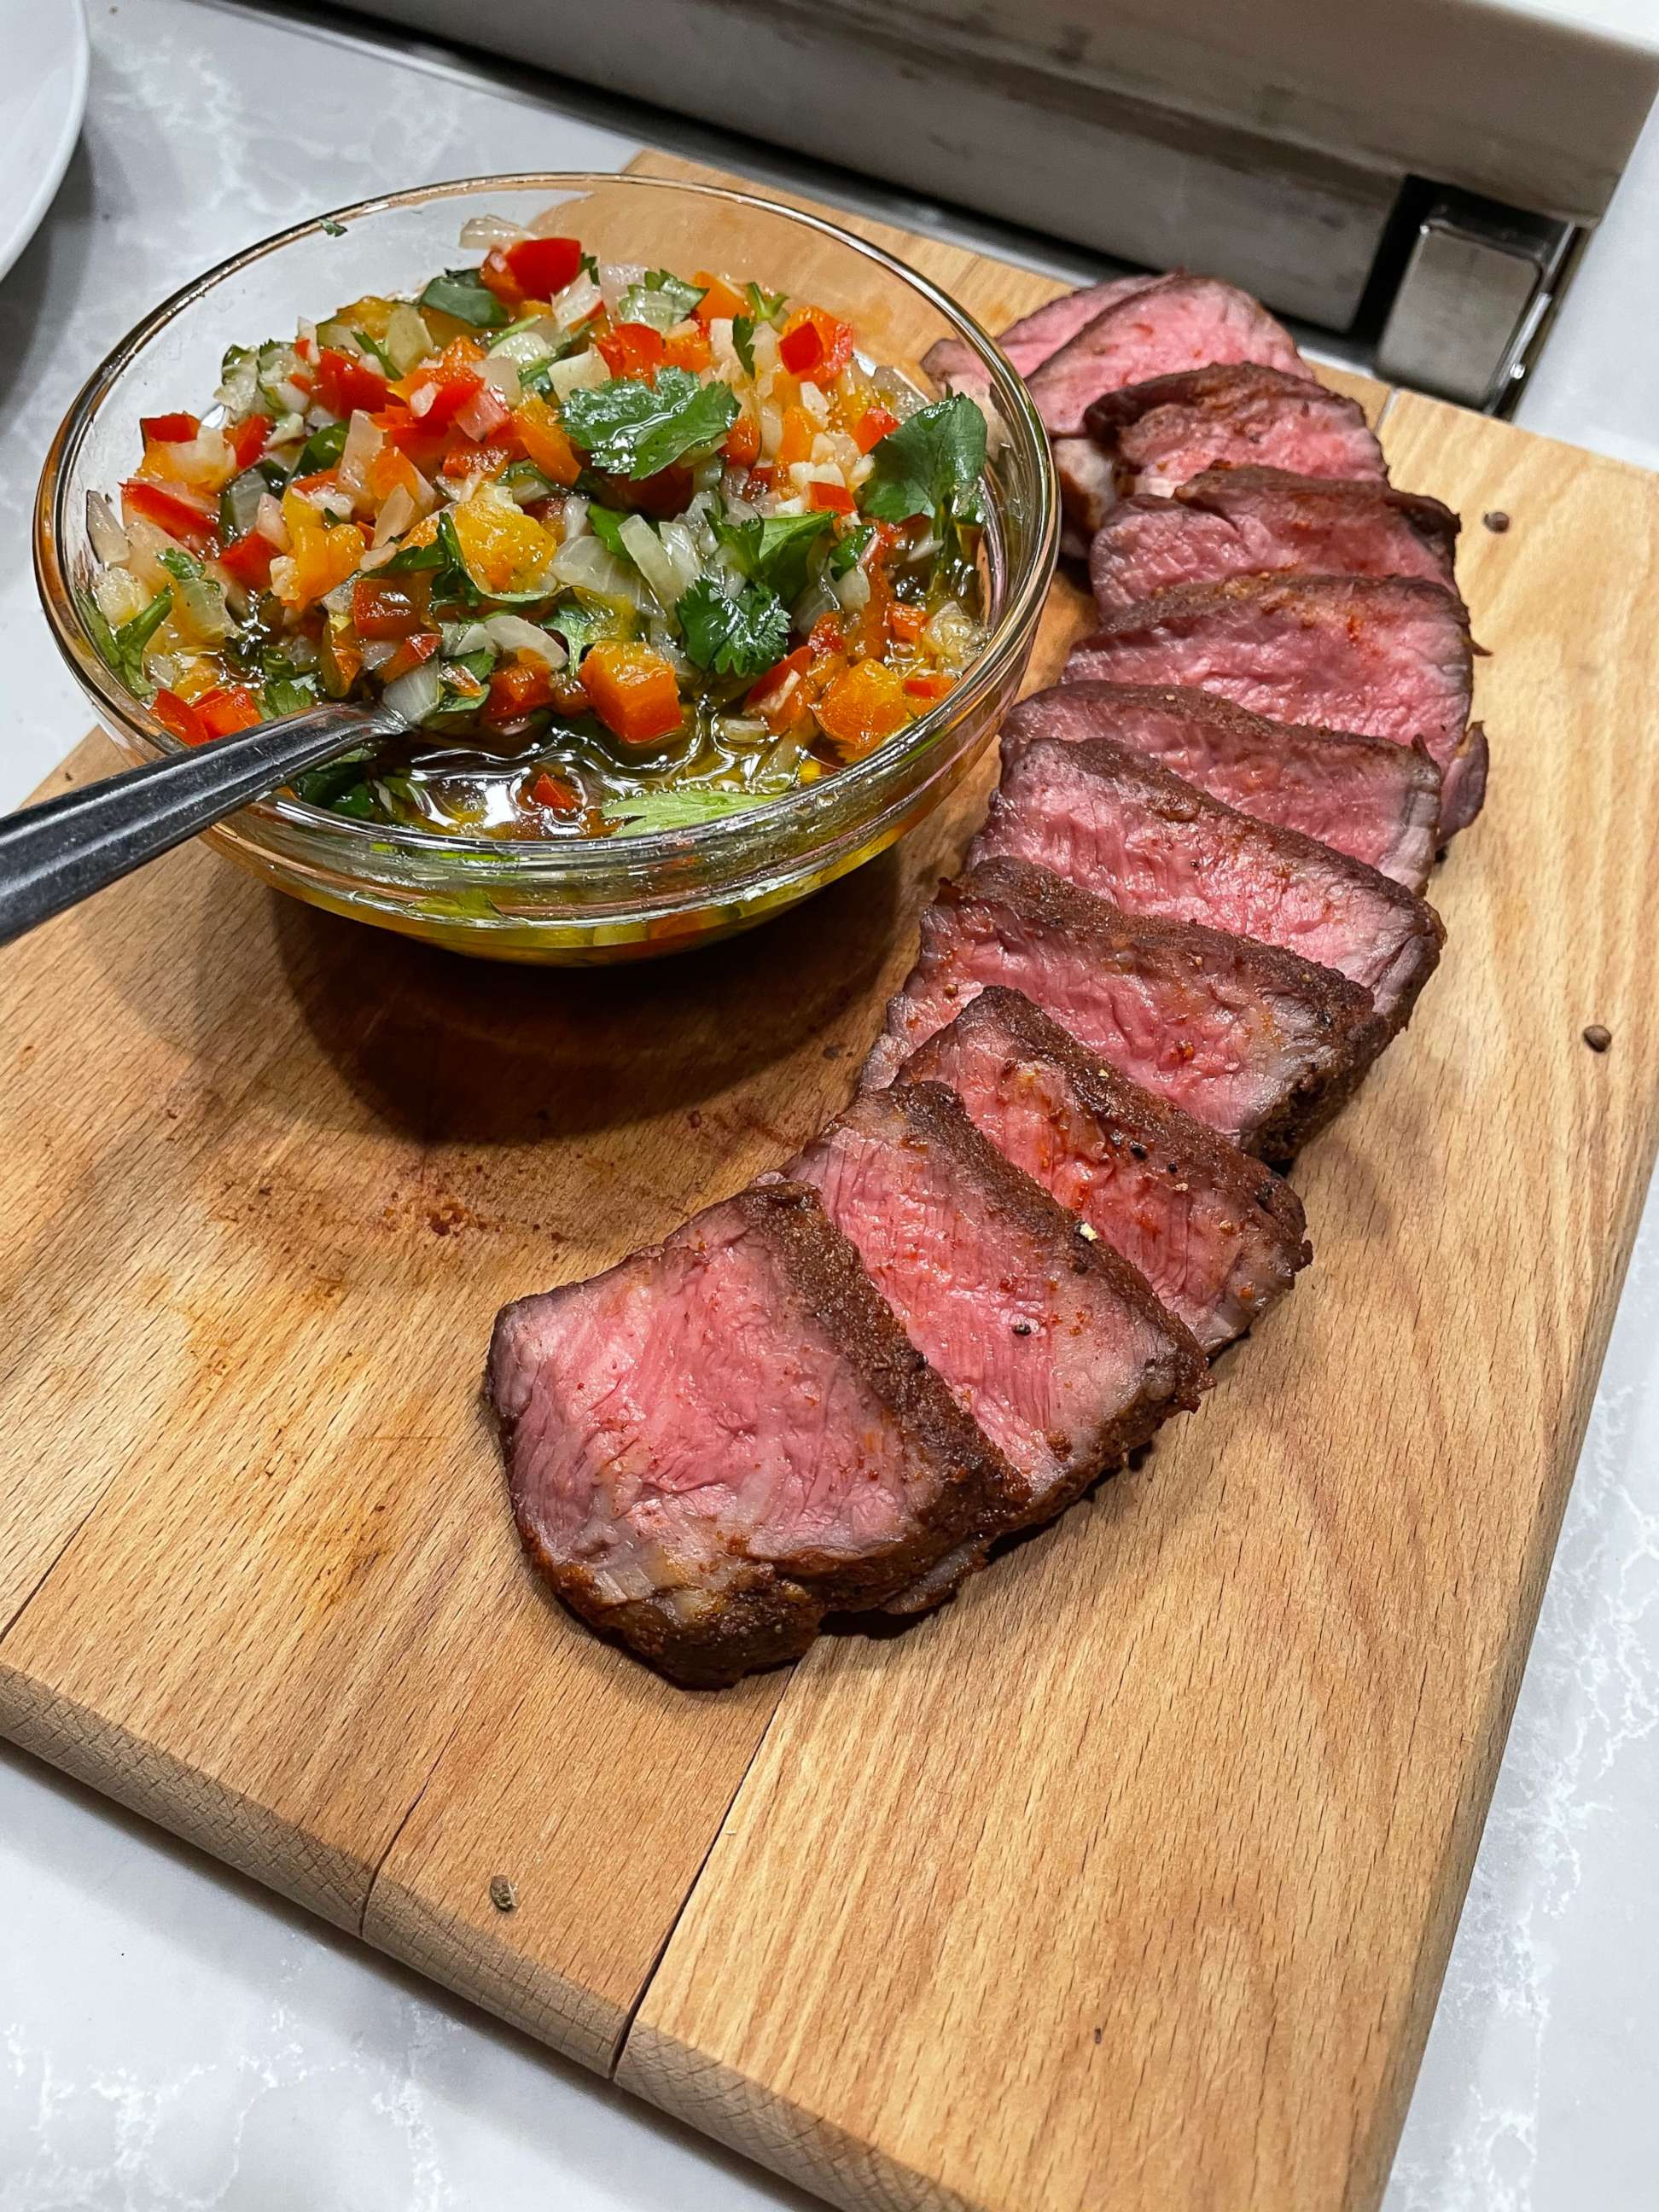 PHOTO: Roasted boneless short ribs with red pepper relish made on "GMA."